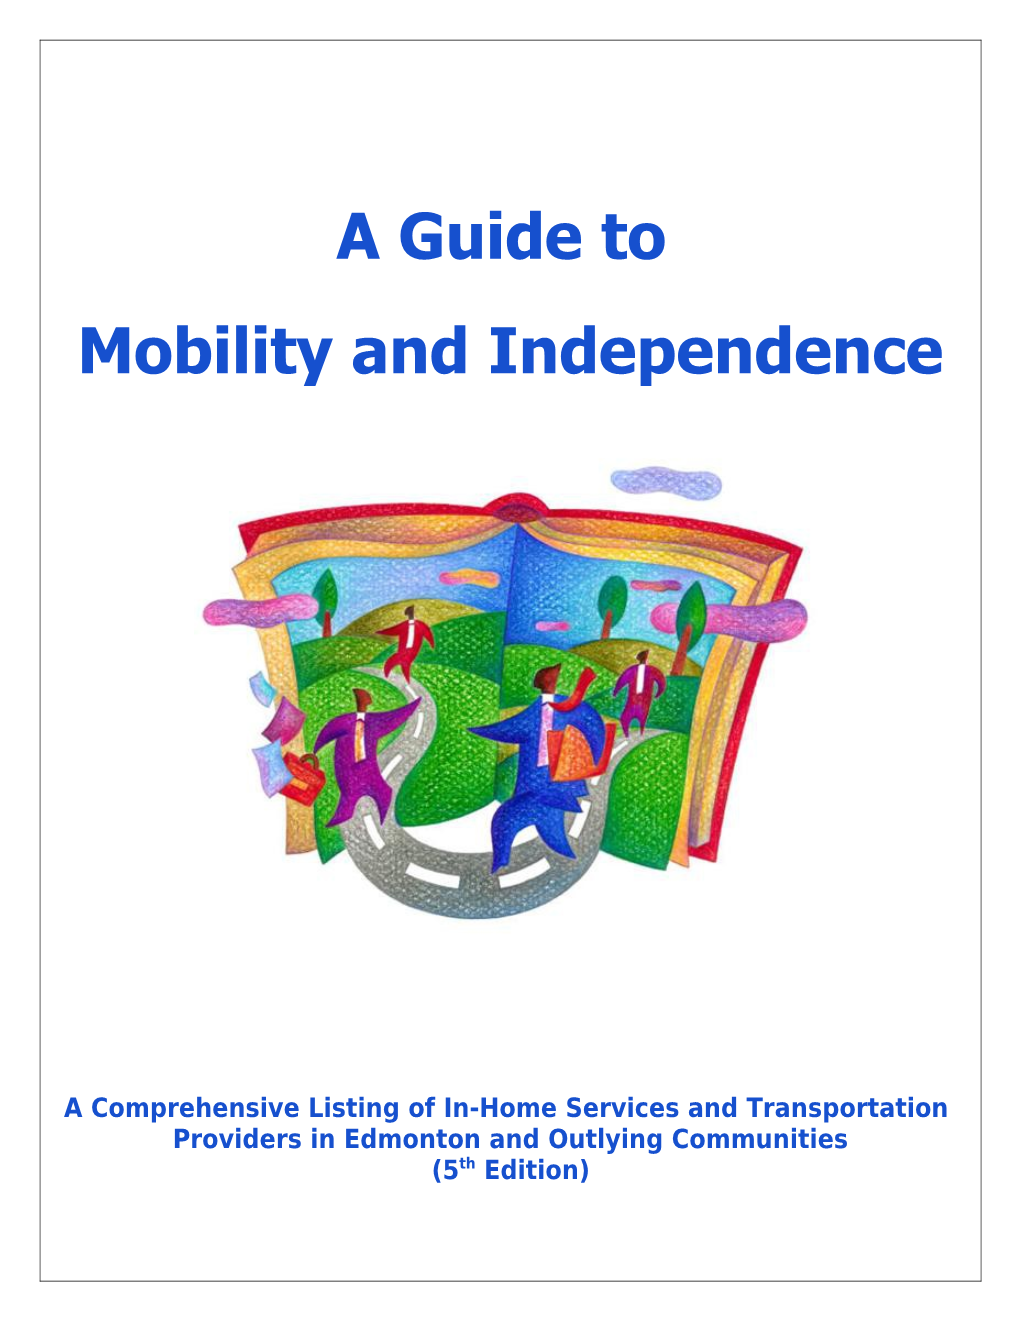 A Comprehensive Listing of In-Homeservices and Transportation